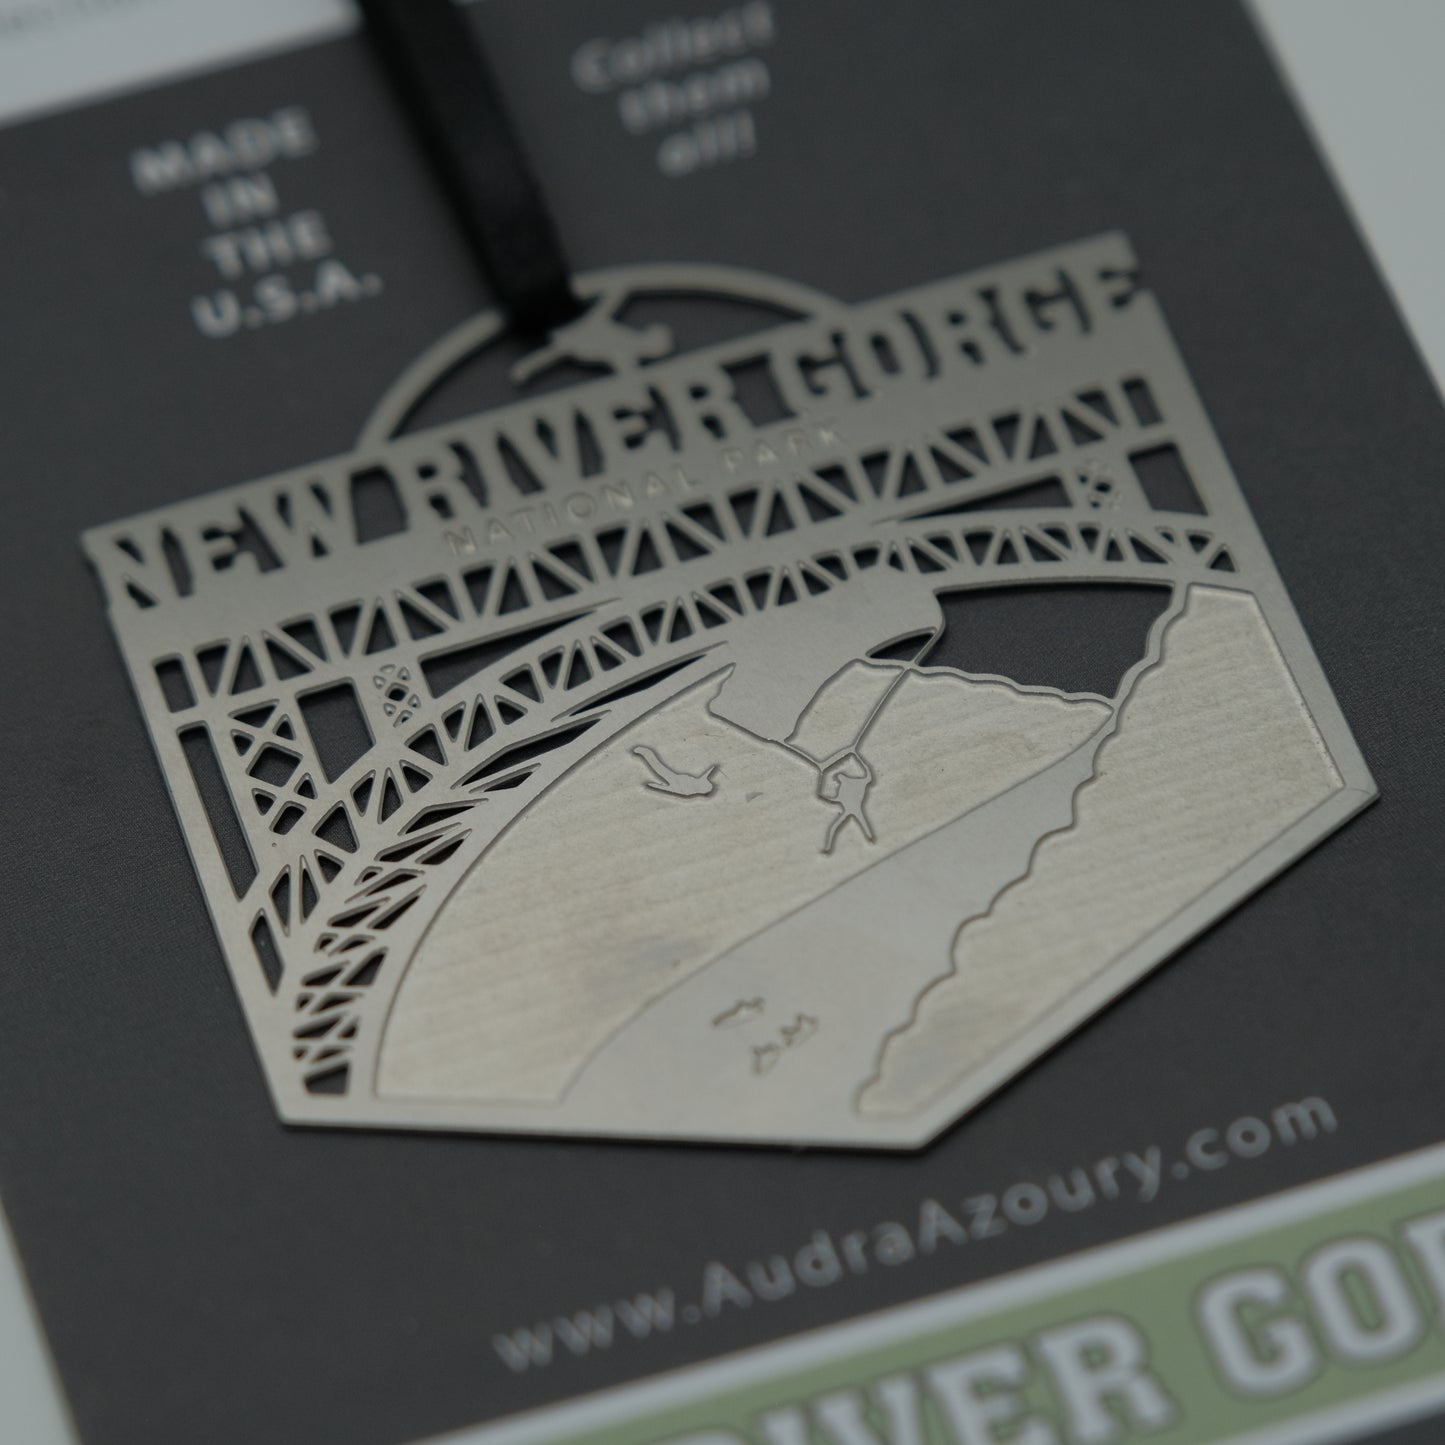 New River Gorge National Park Ornament by Audra Azoury